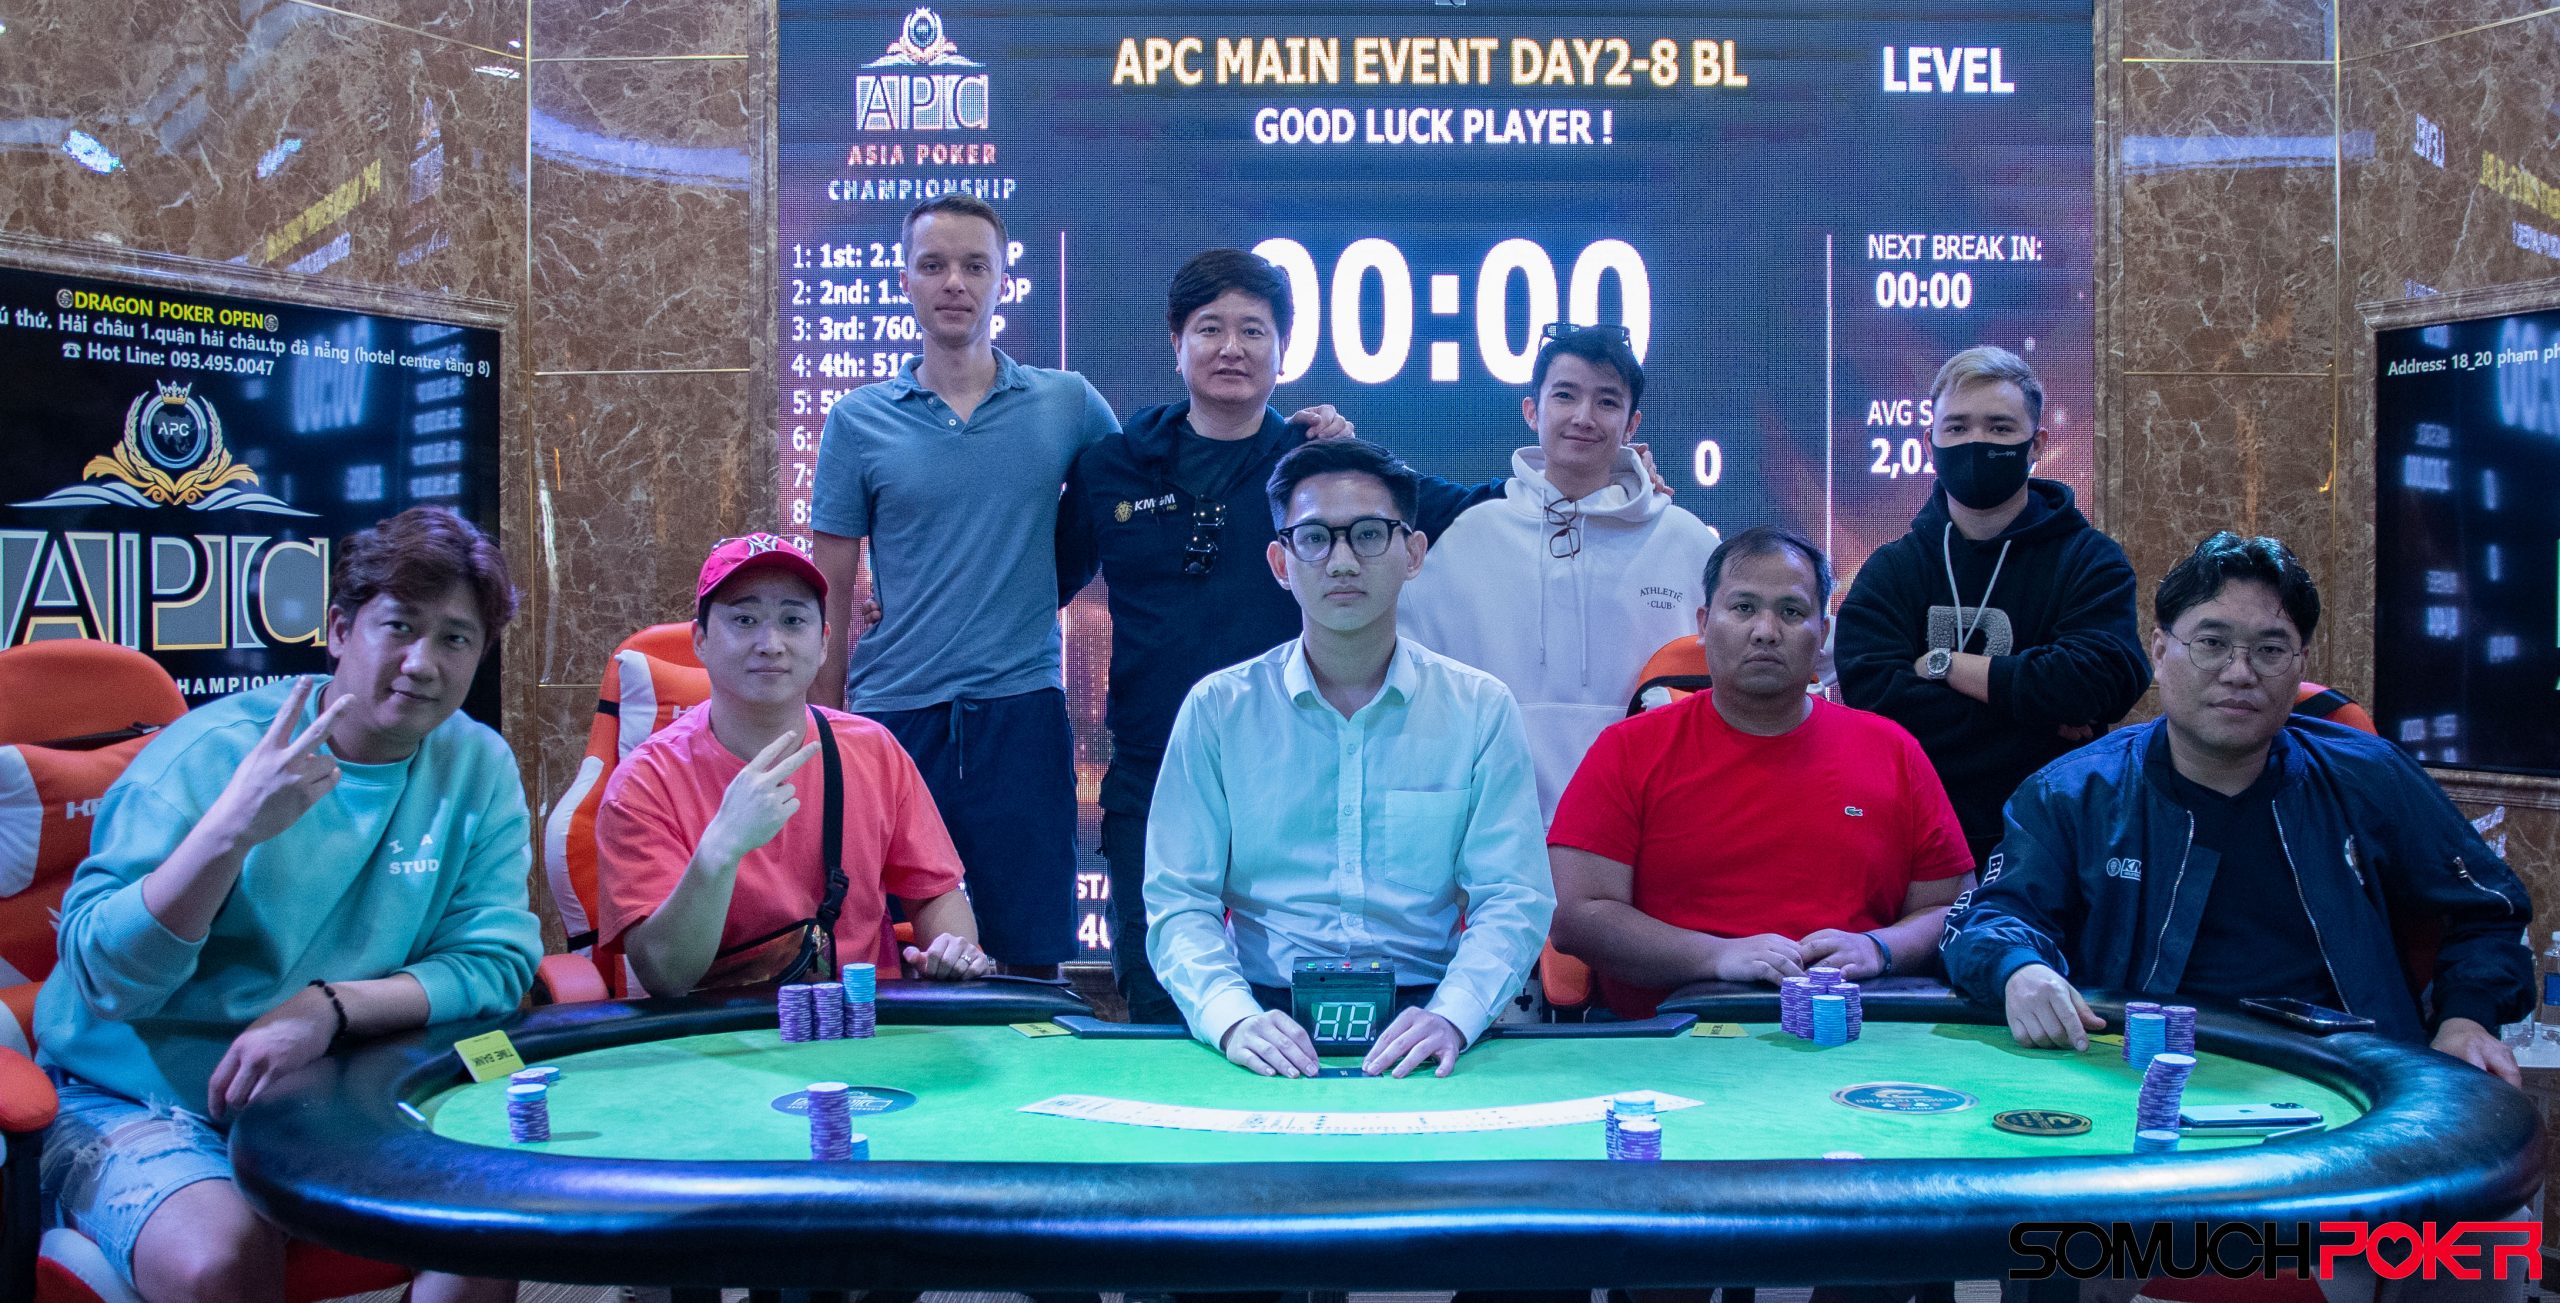 APC Da Nang: Main Event Day 3 will crown its first Main Event champion; last chance to enter the High Roller and Megastack Closer Turbo